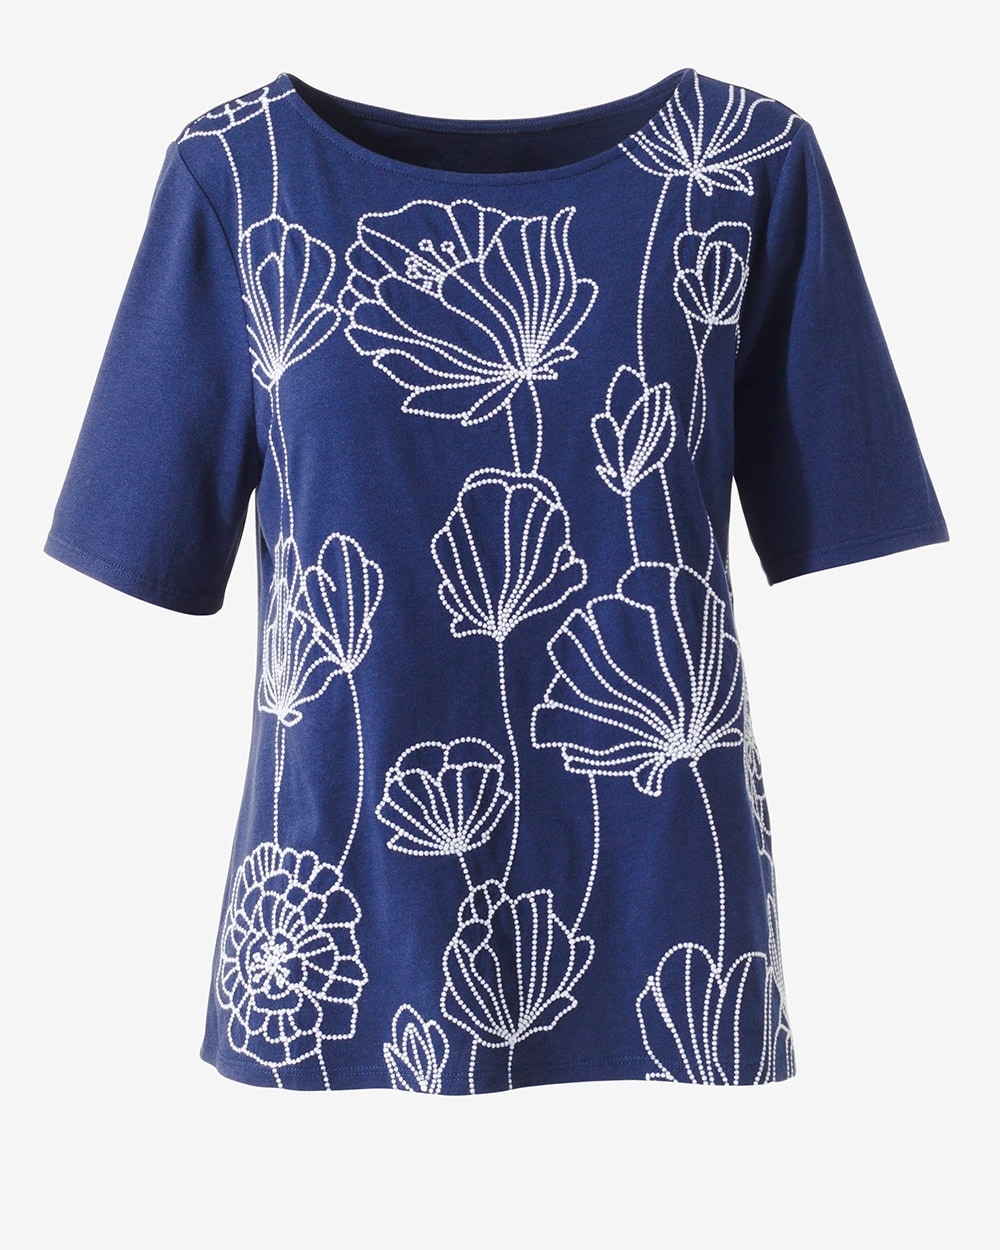 Floral Embroidery Boat-Neck Tee